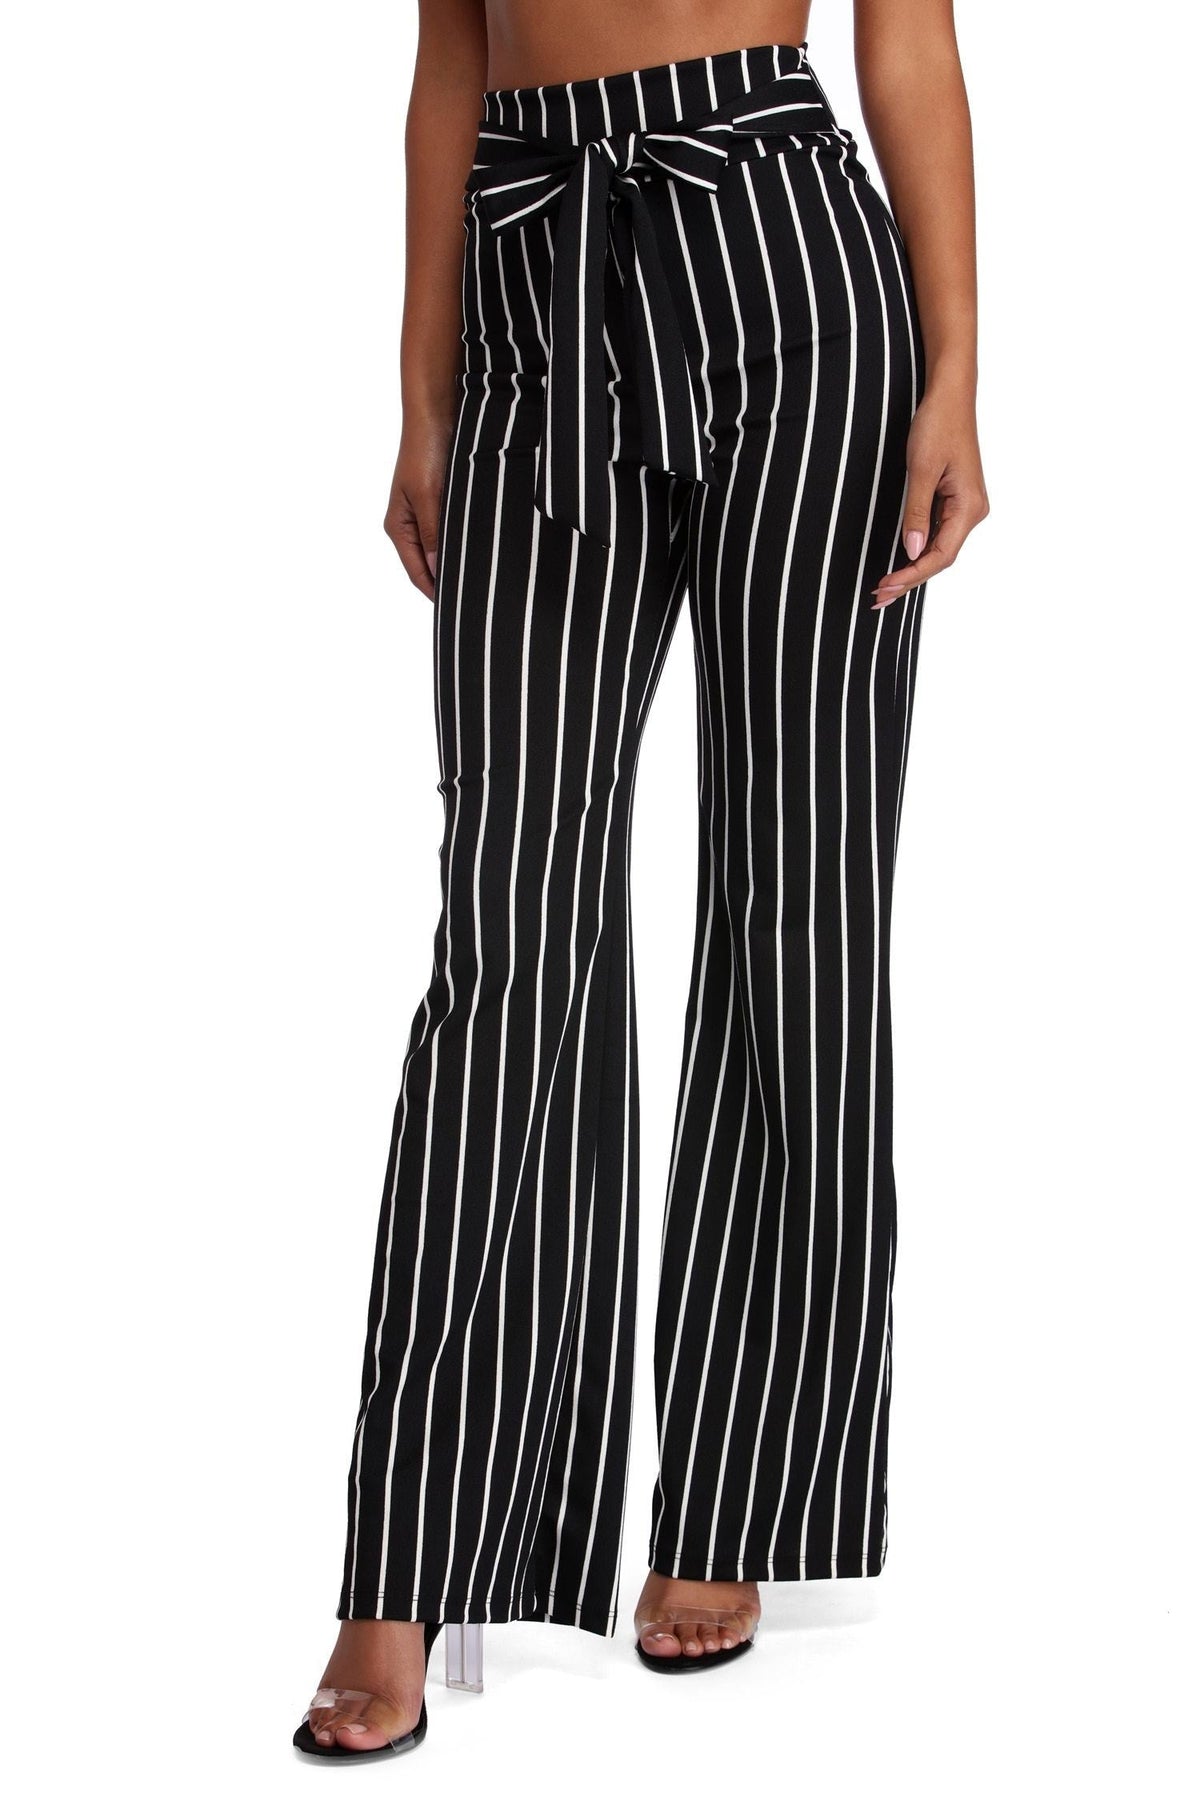 Classic Stripes Tie Waist Pants - Lady Occasions